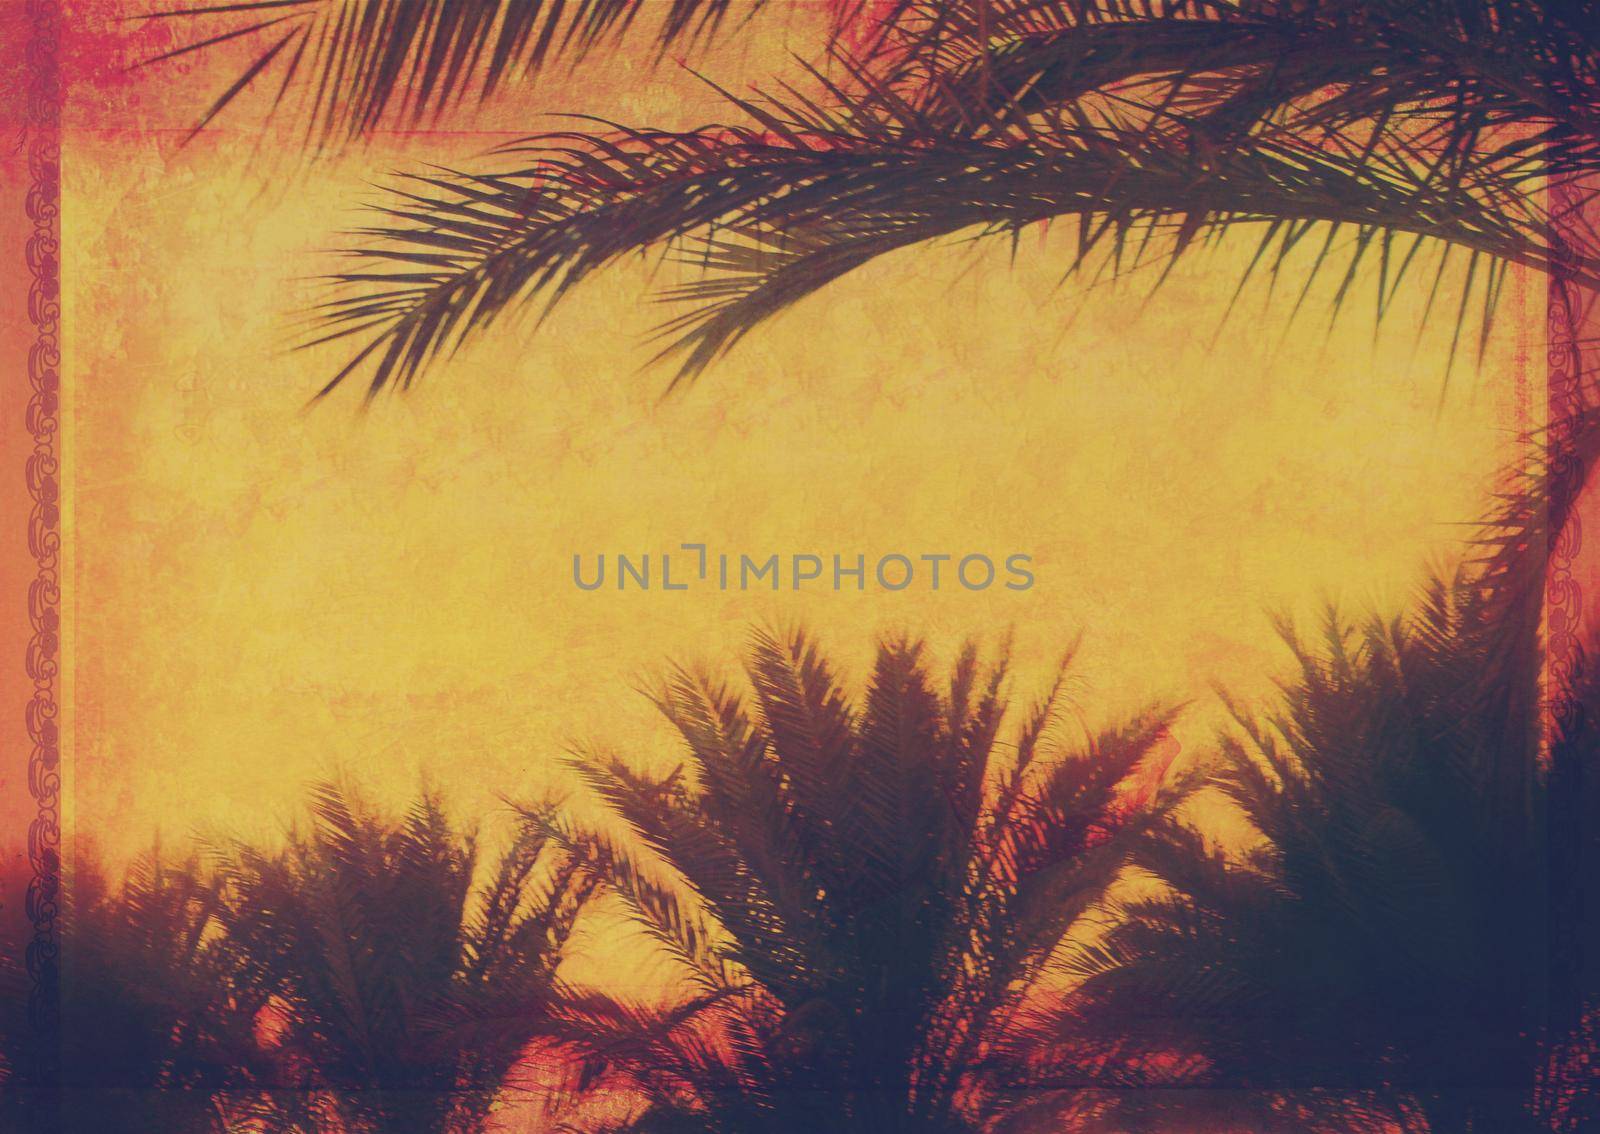 Grunge tropical background with coconut palm trees. Image in vintage style by JackyBrown